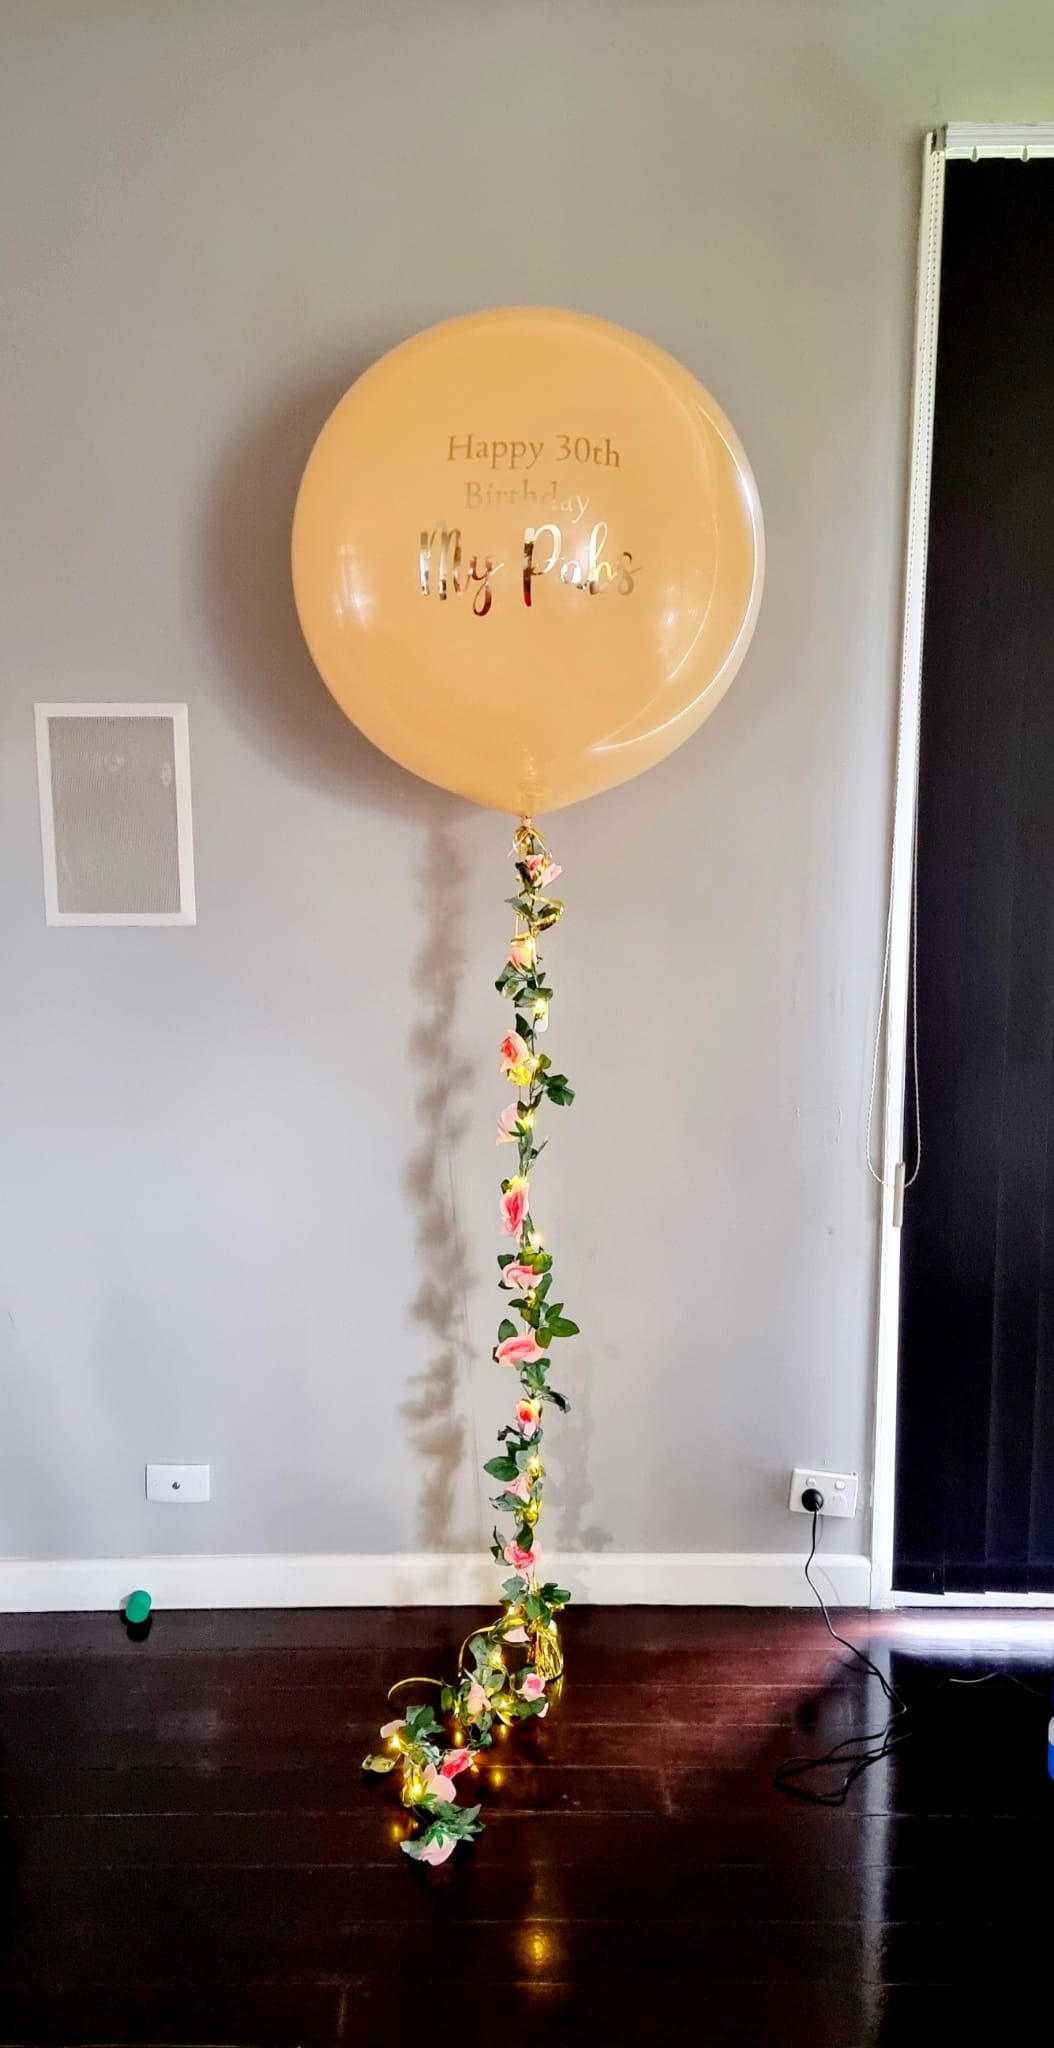 Coral Bubble Balloon XL with an Illuminated Floral Garland